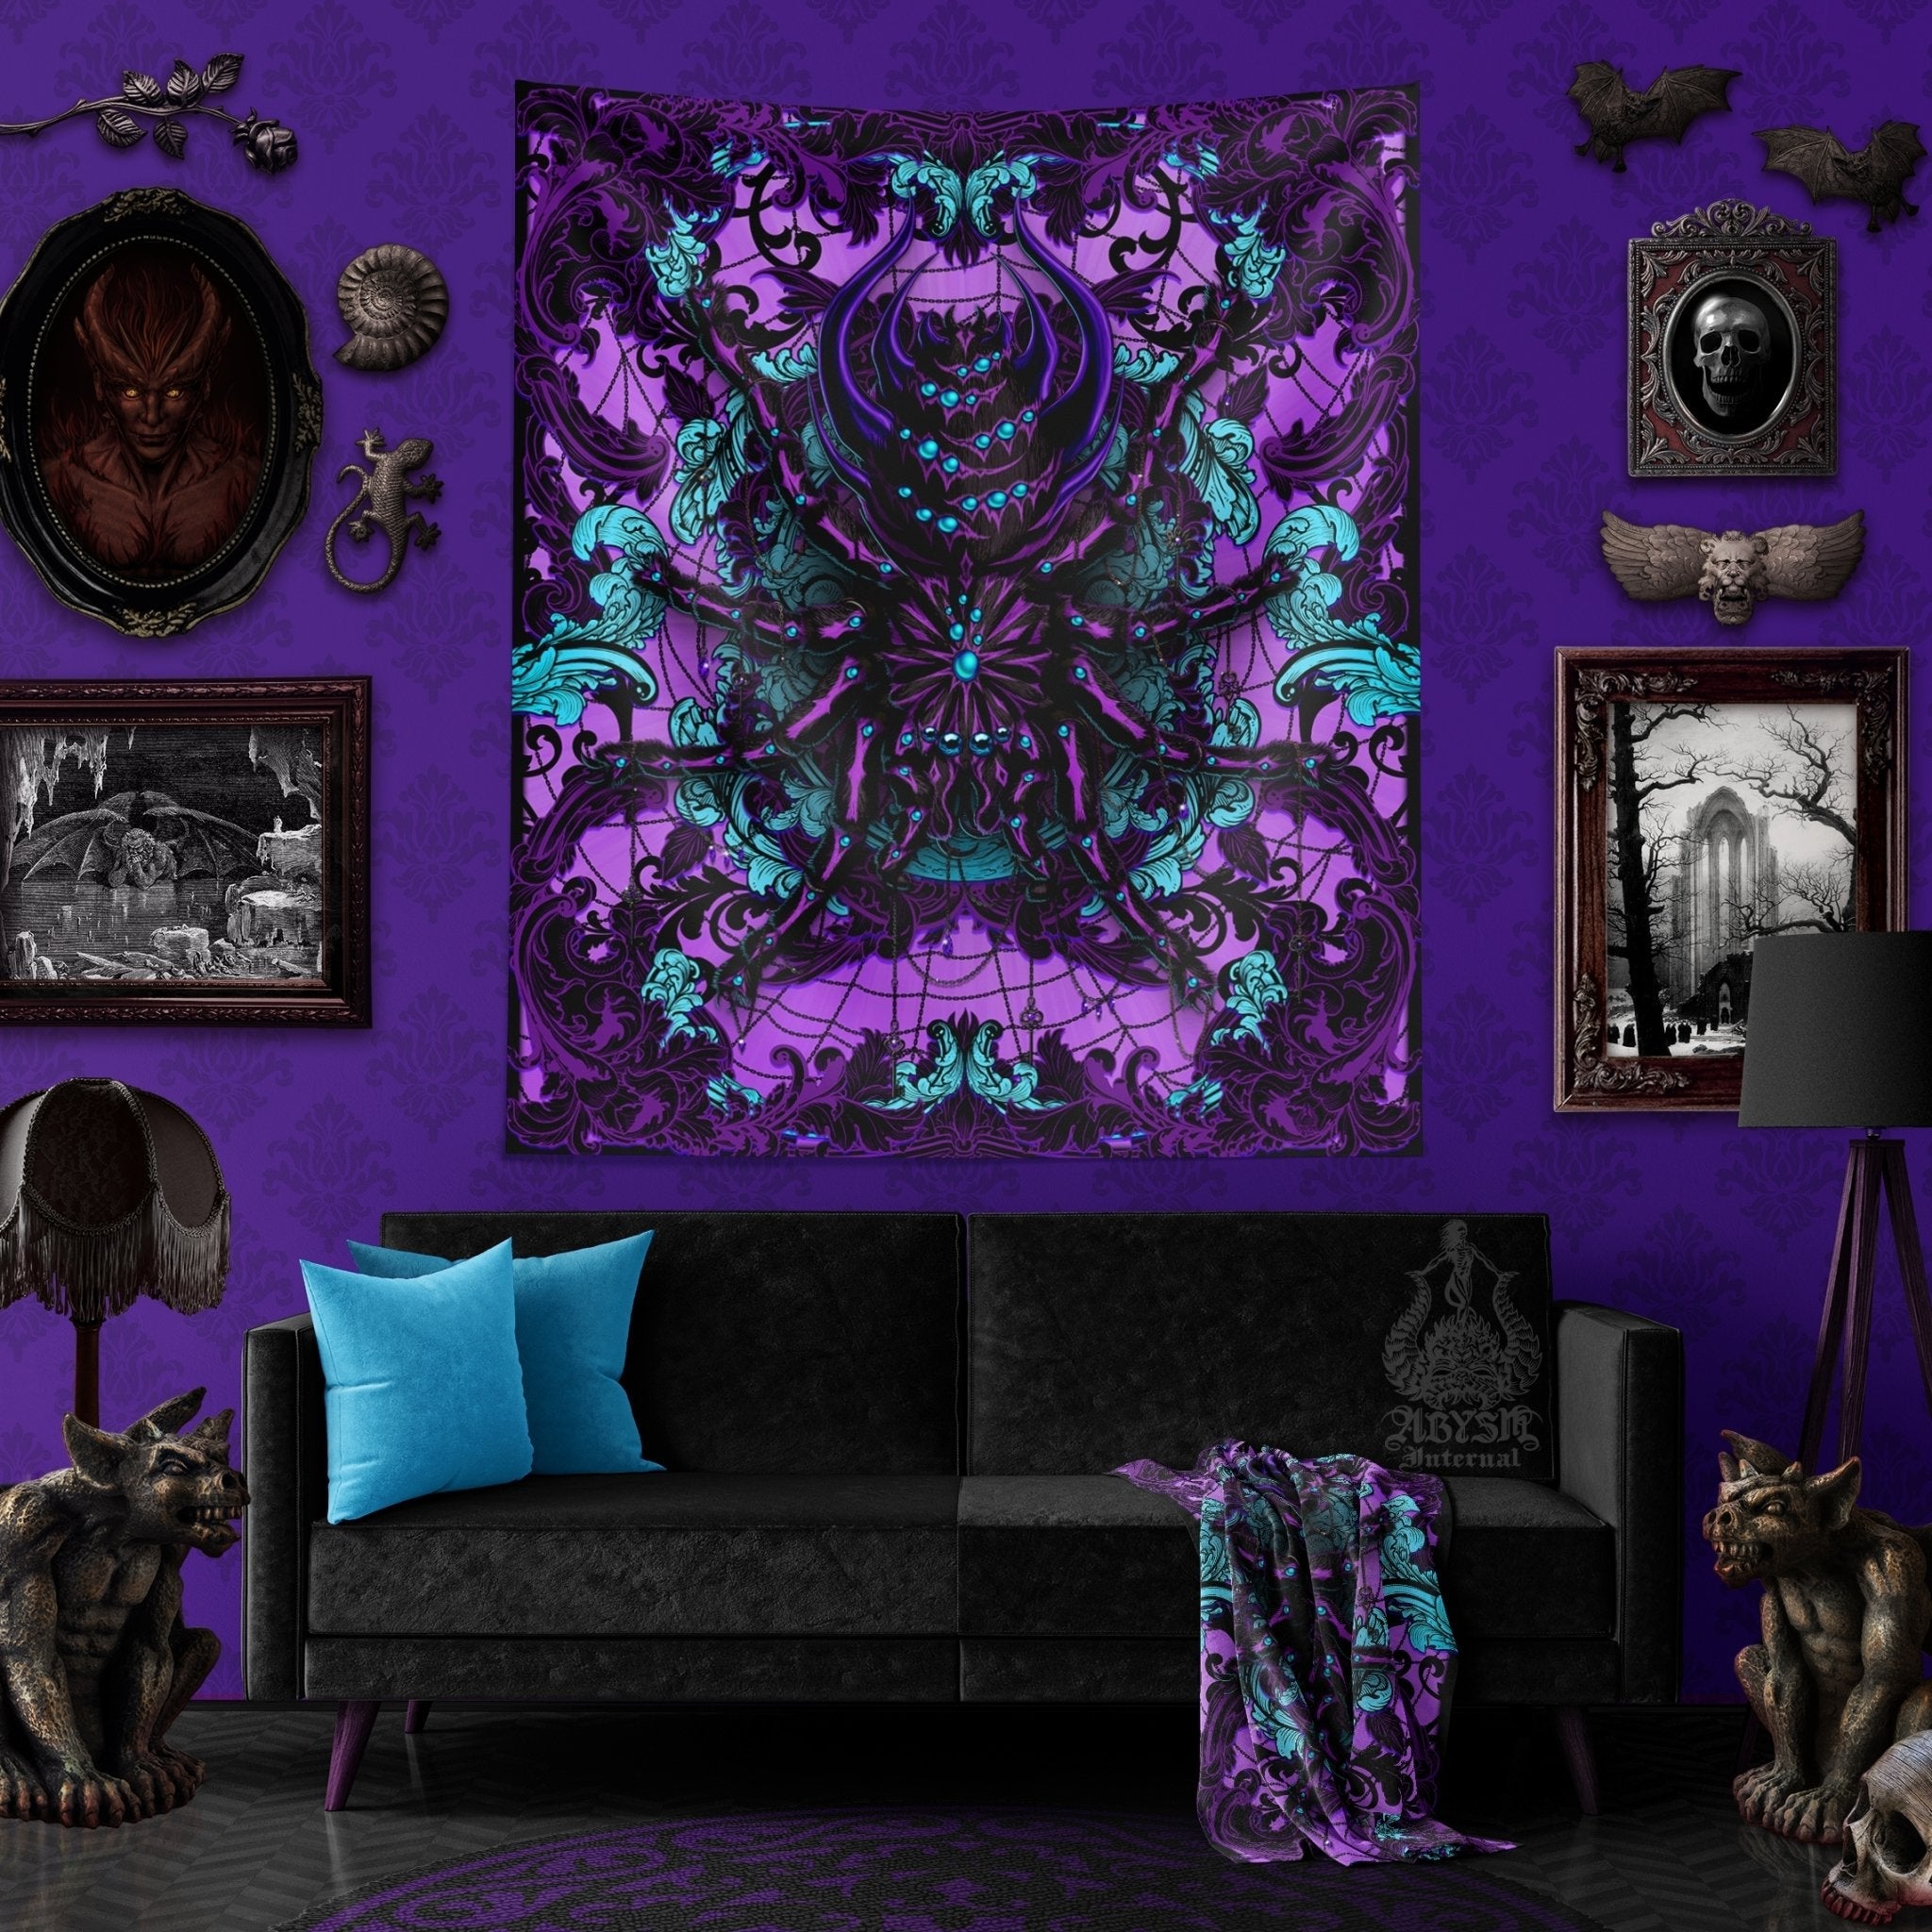 Pastel Goth Tapestry, Spider Wall Hanging, Gothic Home Decor, Tarantula Art Print - Black and Purple - Abysm Internal